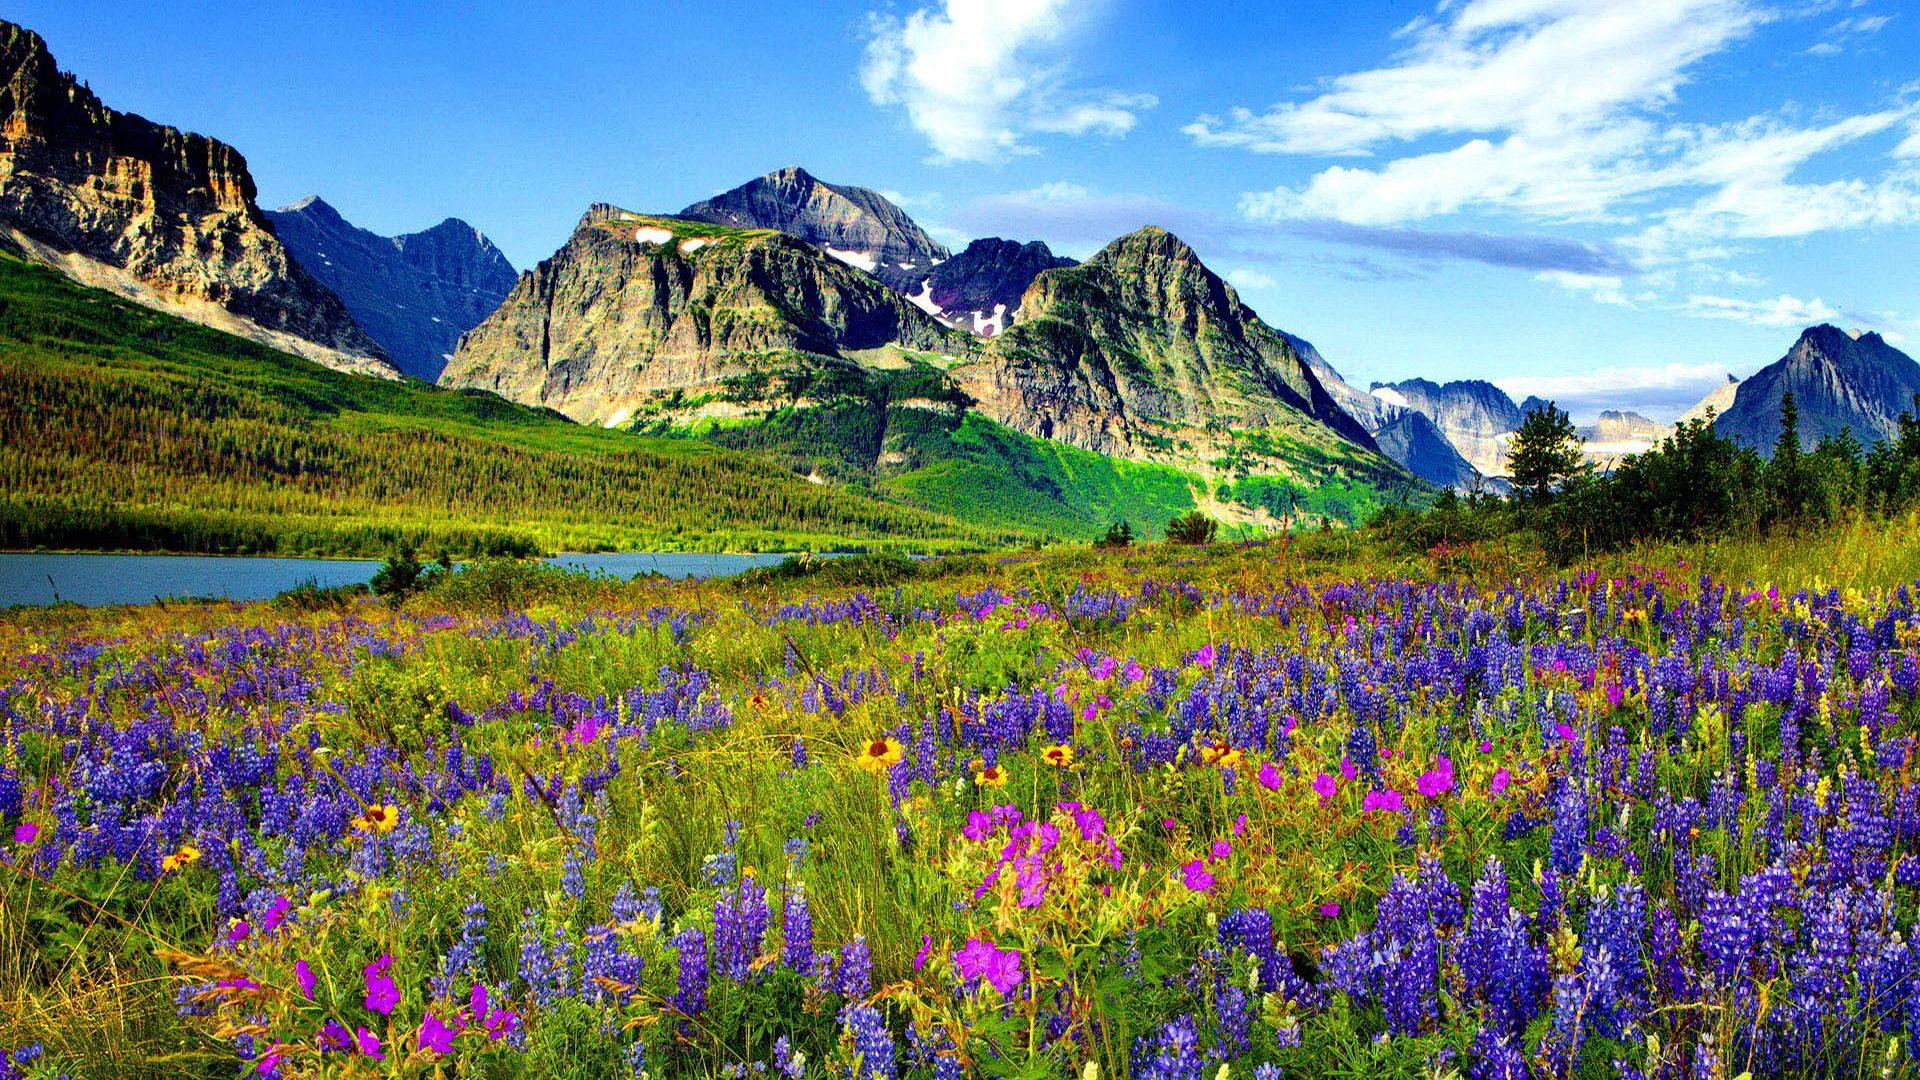 Mountain and Flowers Wallpapers - Top Free Mountain and Flowers ...